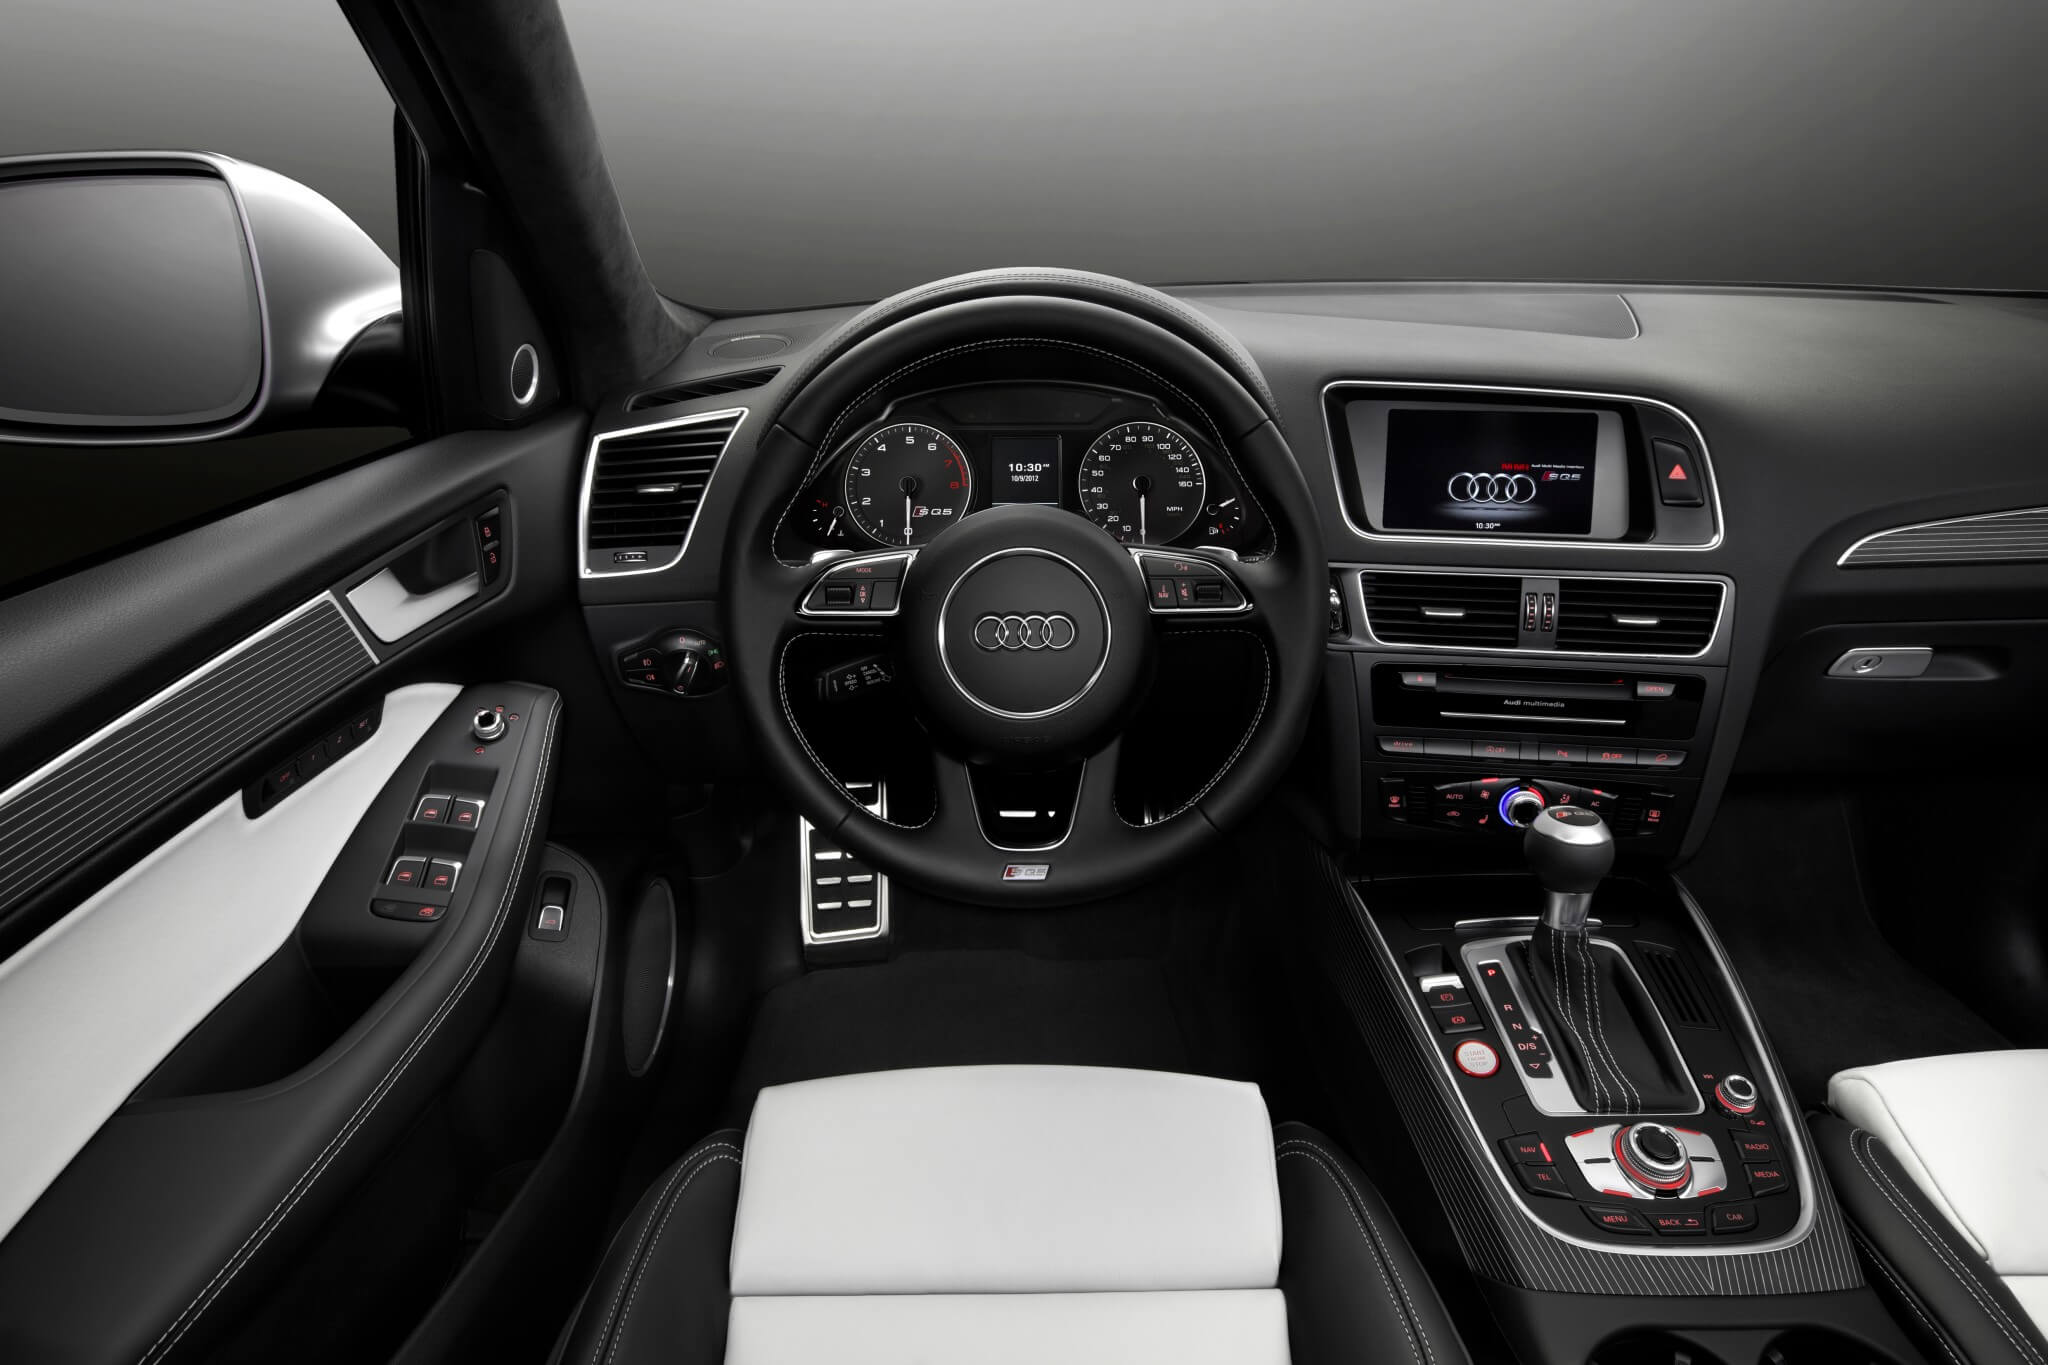 The interior of the Q5 is spacious, comfortable and well laid out. We found all the controls to be within easy reach and generally in a location we expected. 